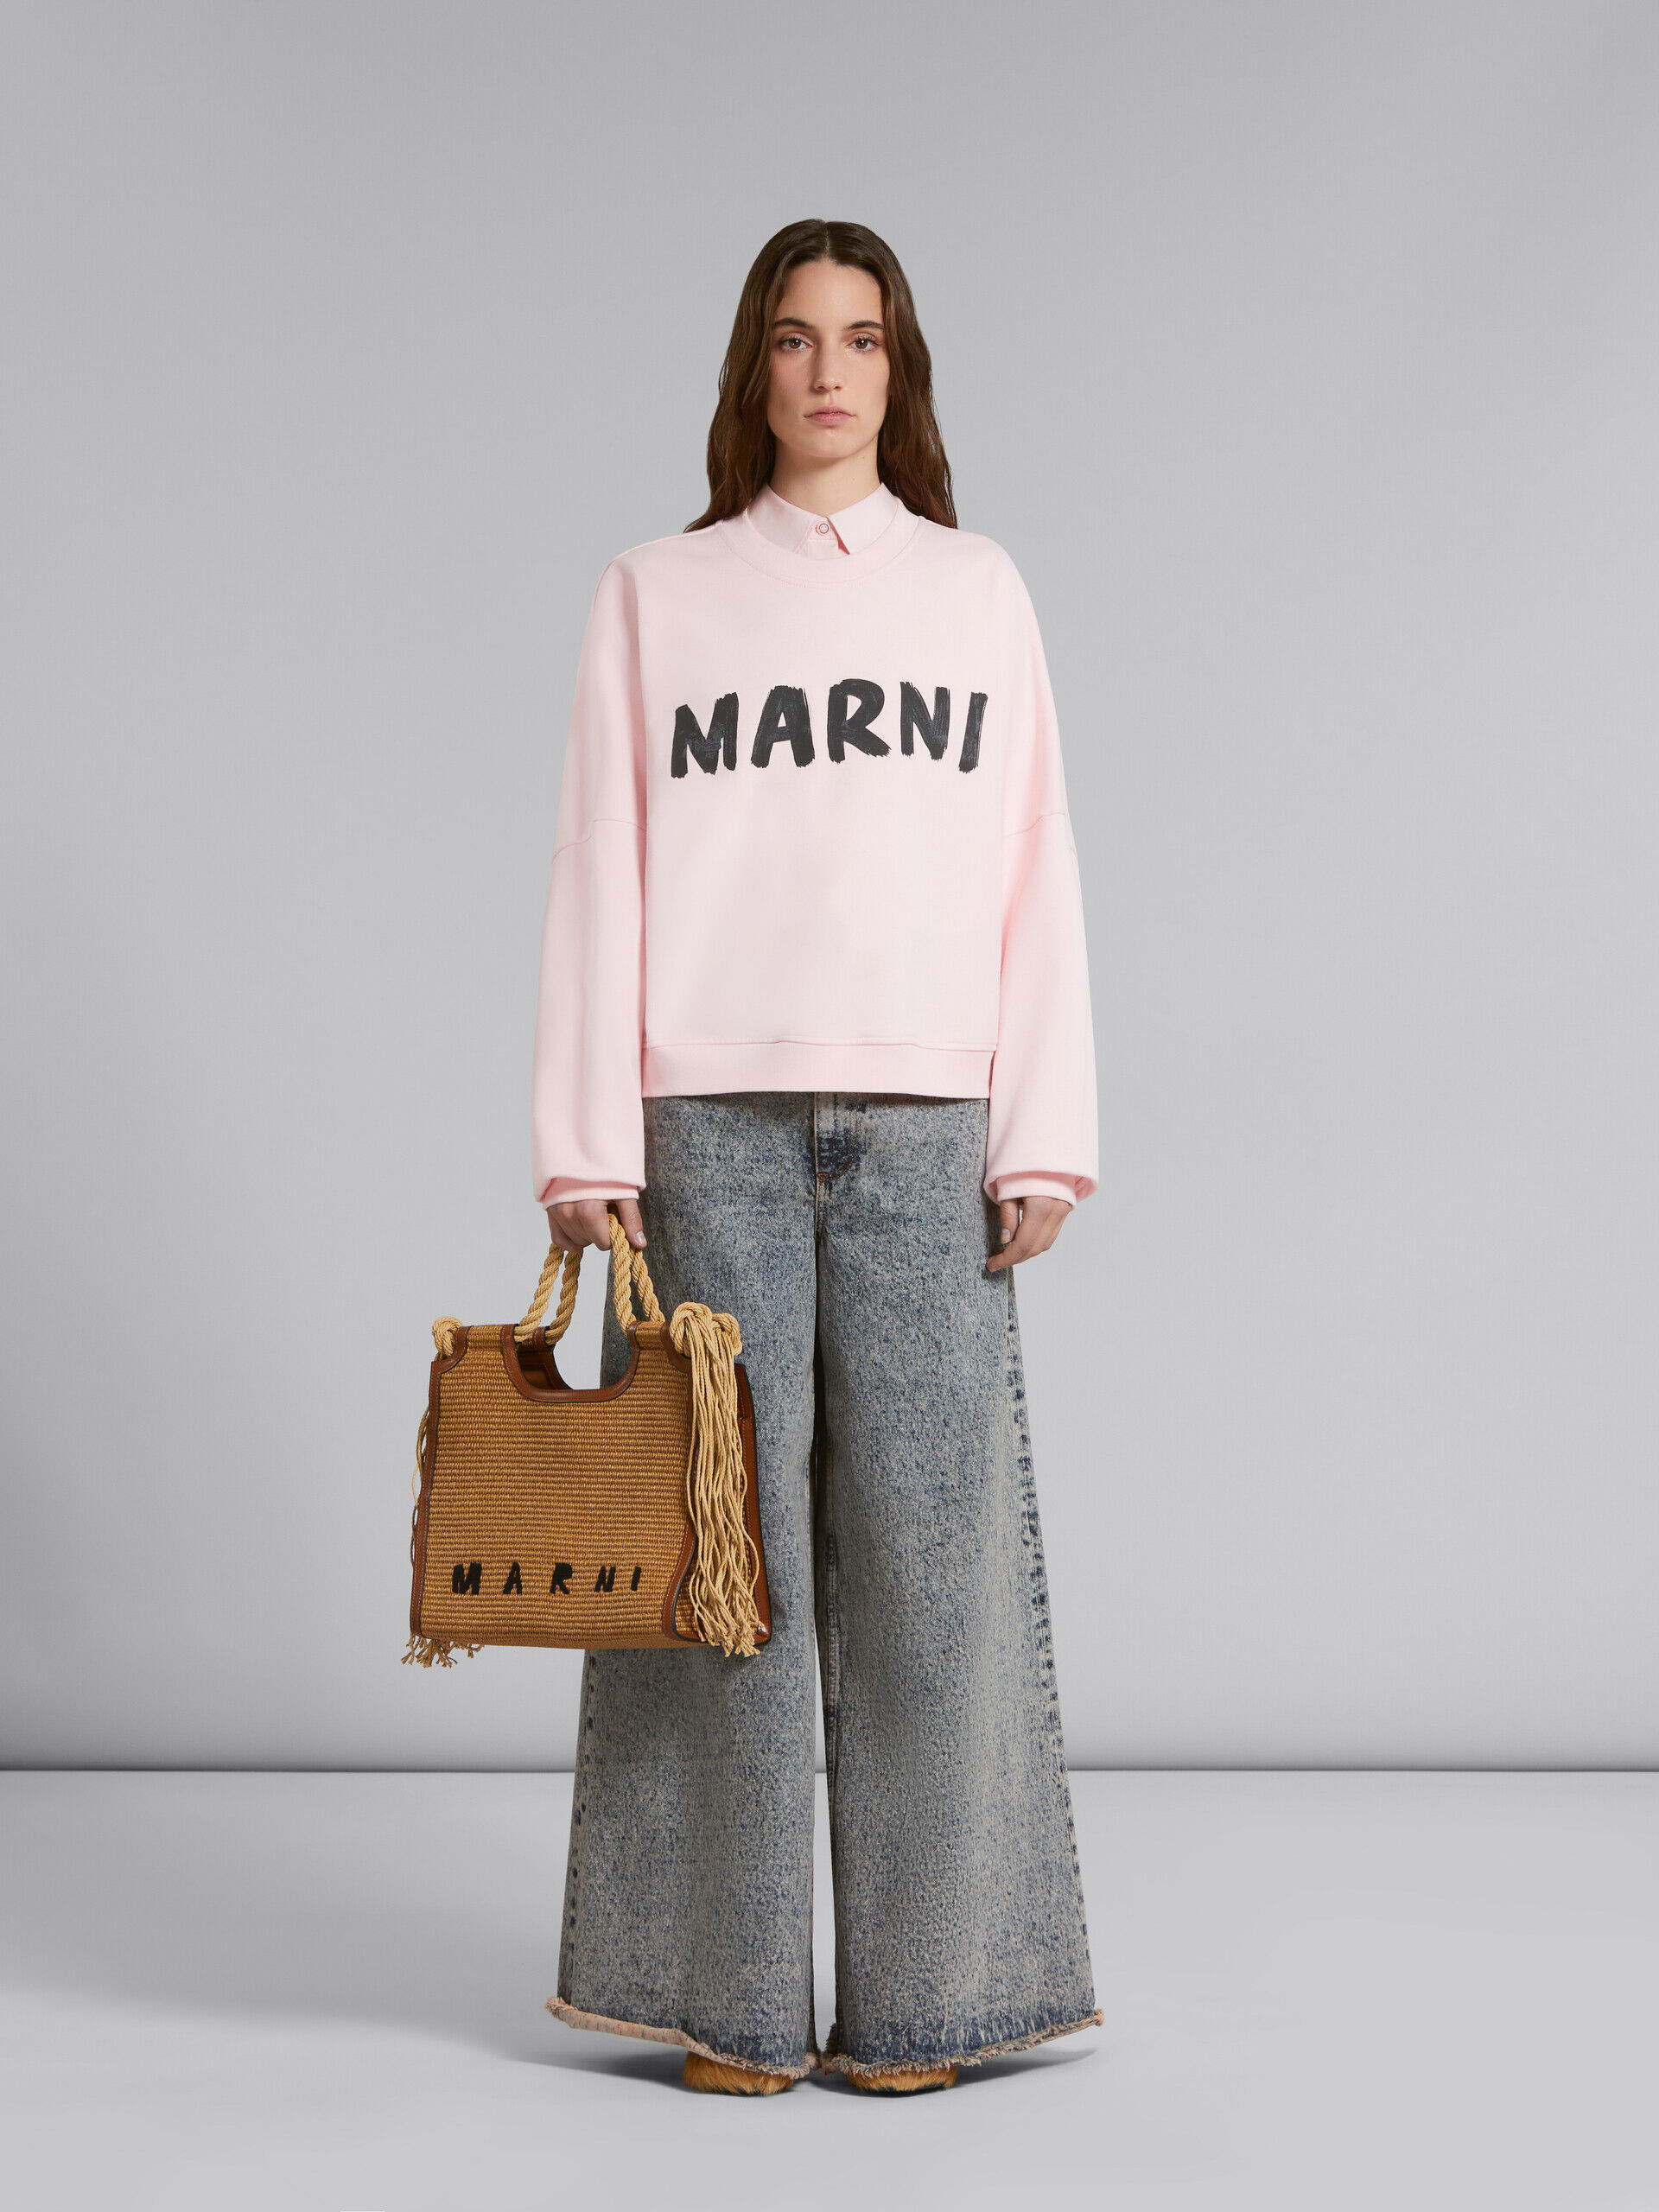 Marcel Summer Bag with rope handles | Marni